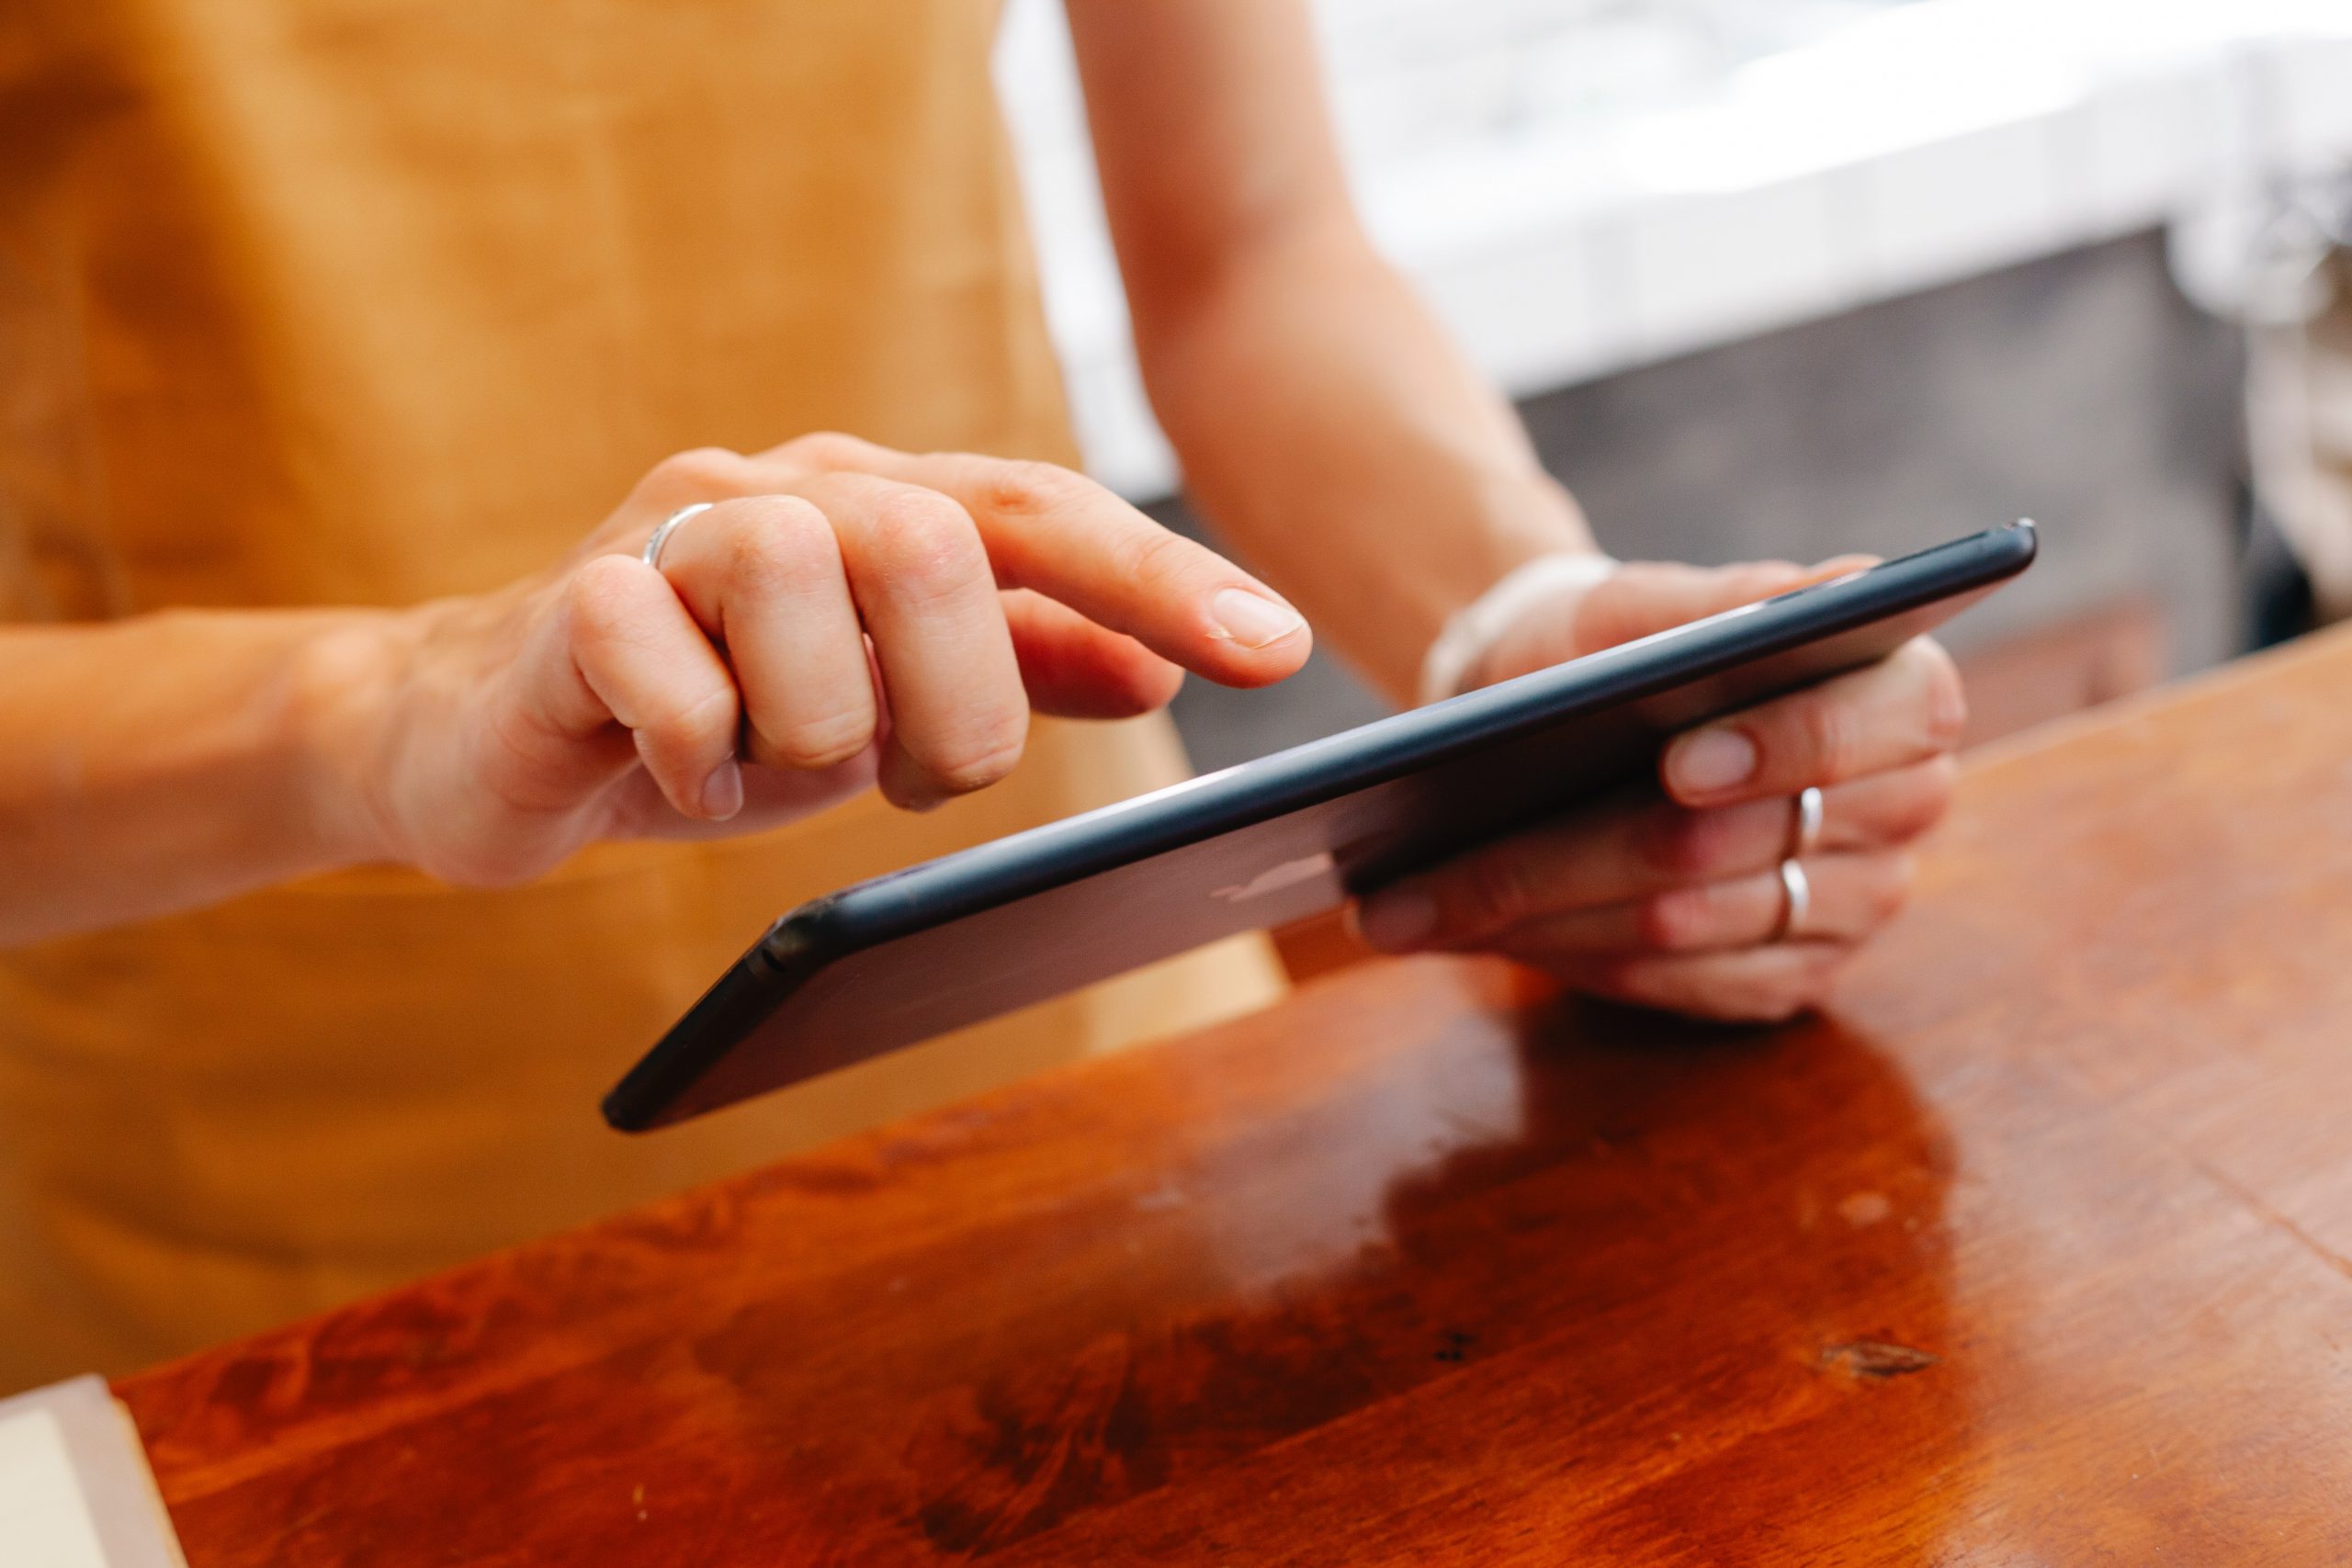 INTEGRATE ORDERING PLATFORMS DIRECTLY TO YOUR RESTAURANT POS